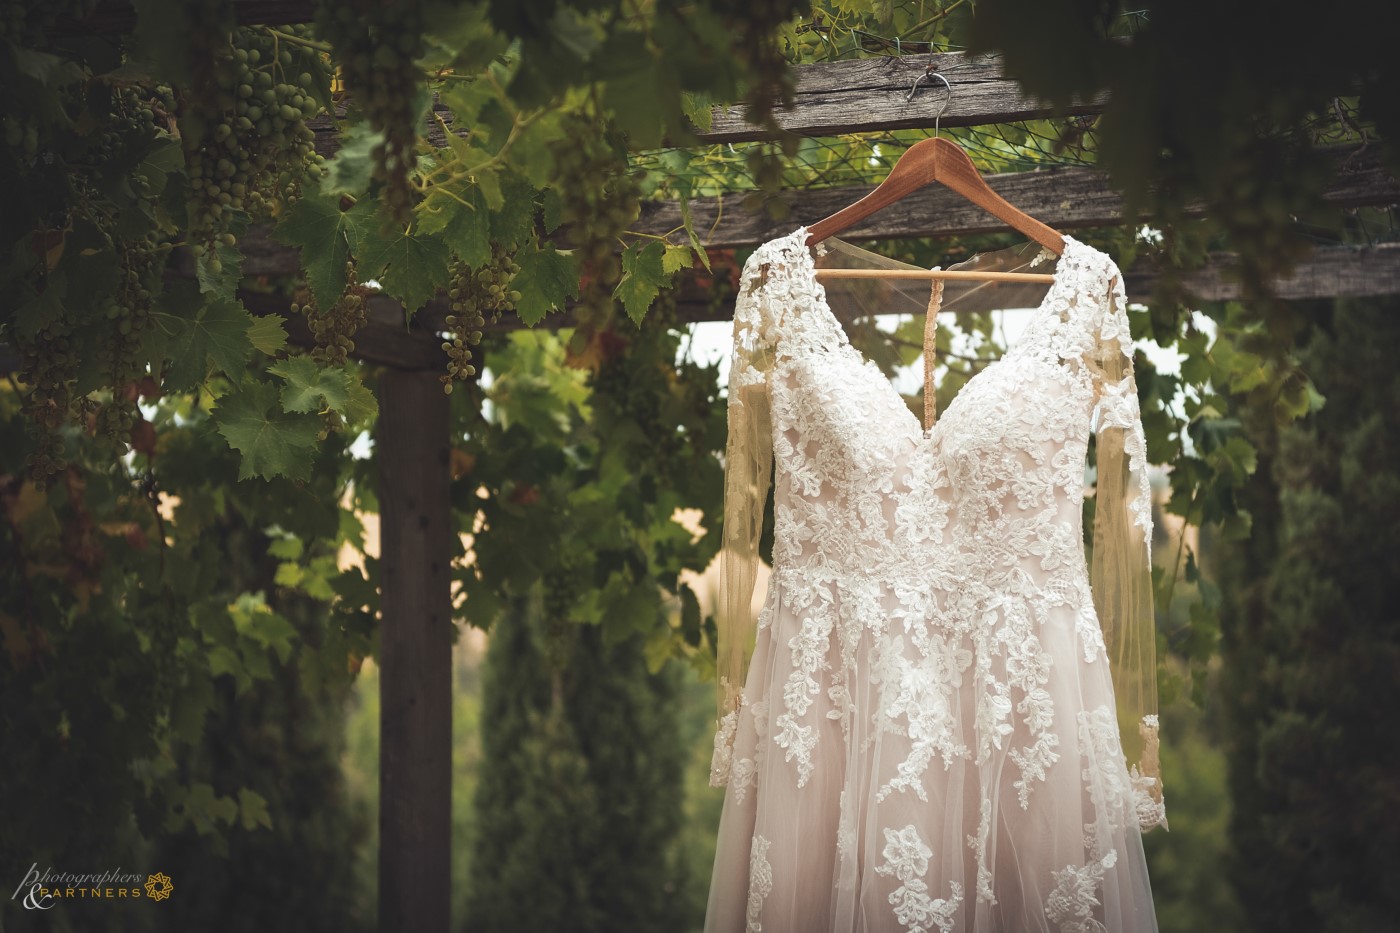 Bride’s dress gently hanging between Tuscan grapes.